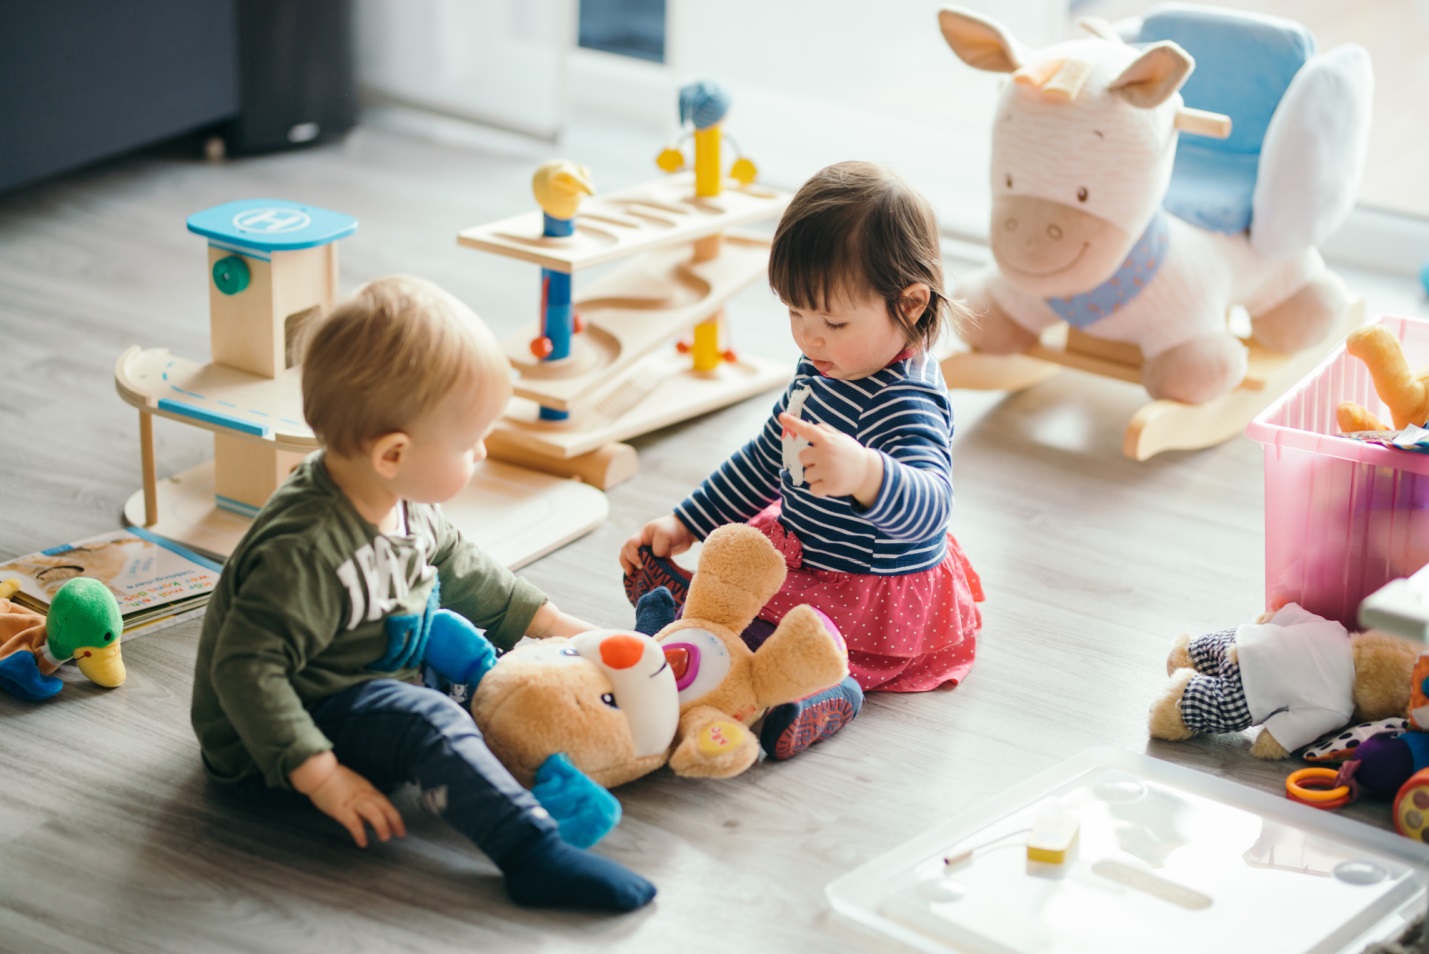 Two children enjoying toys in a cozy living room.